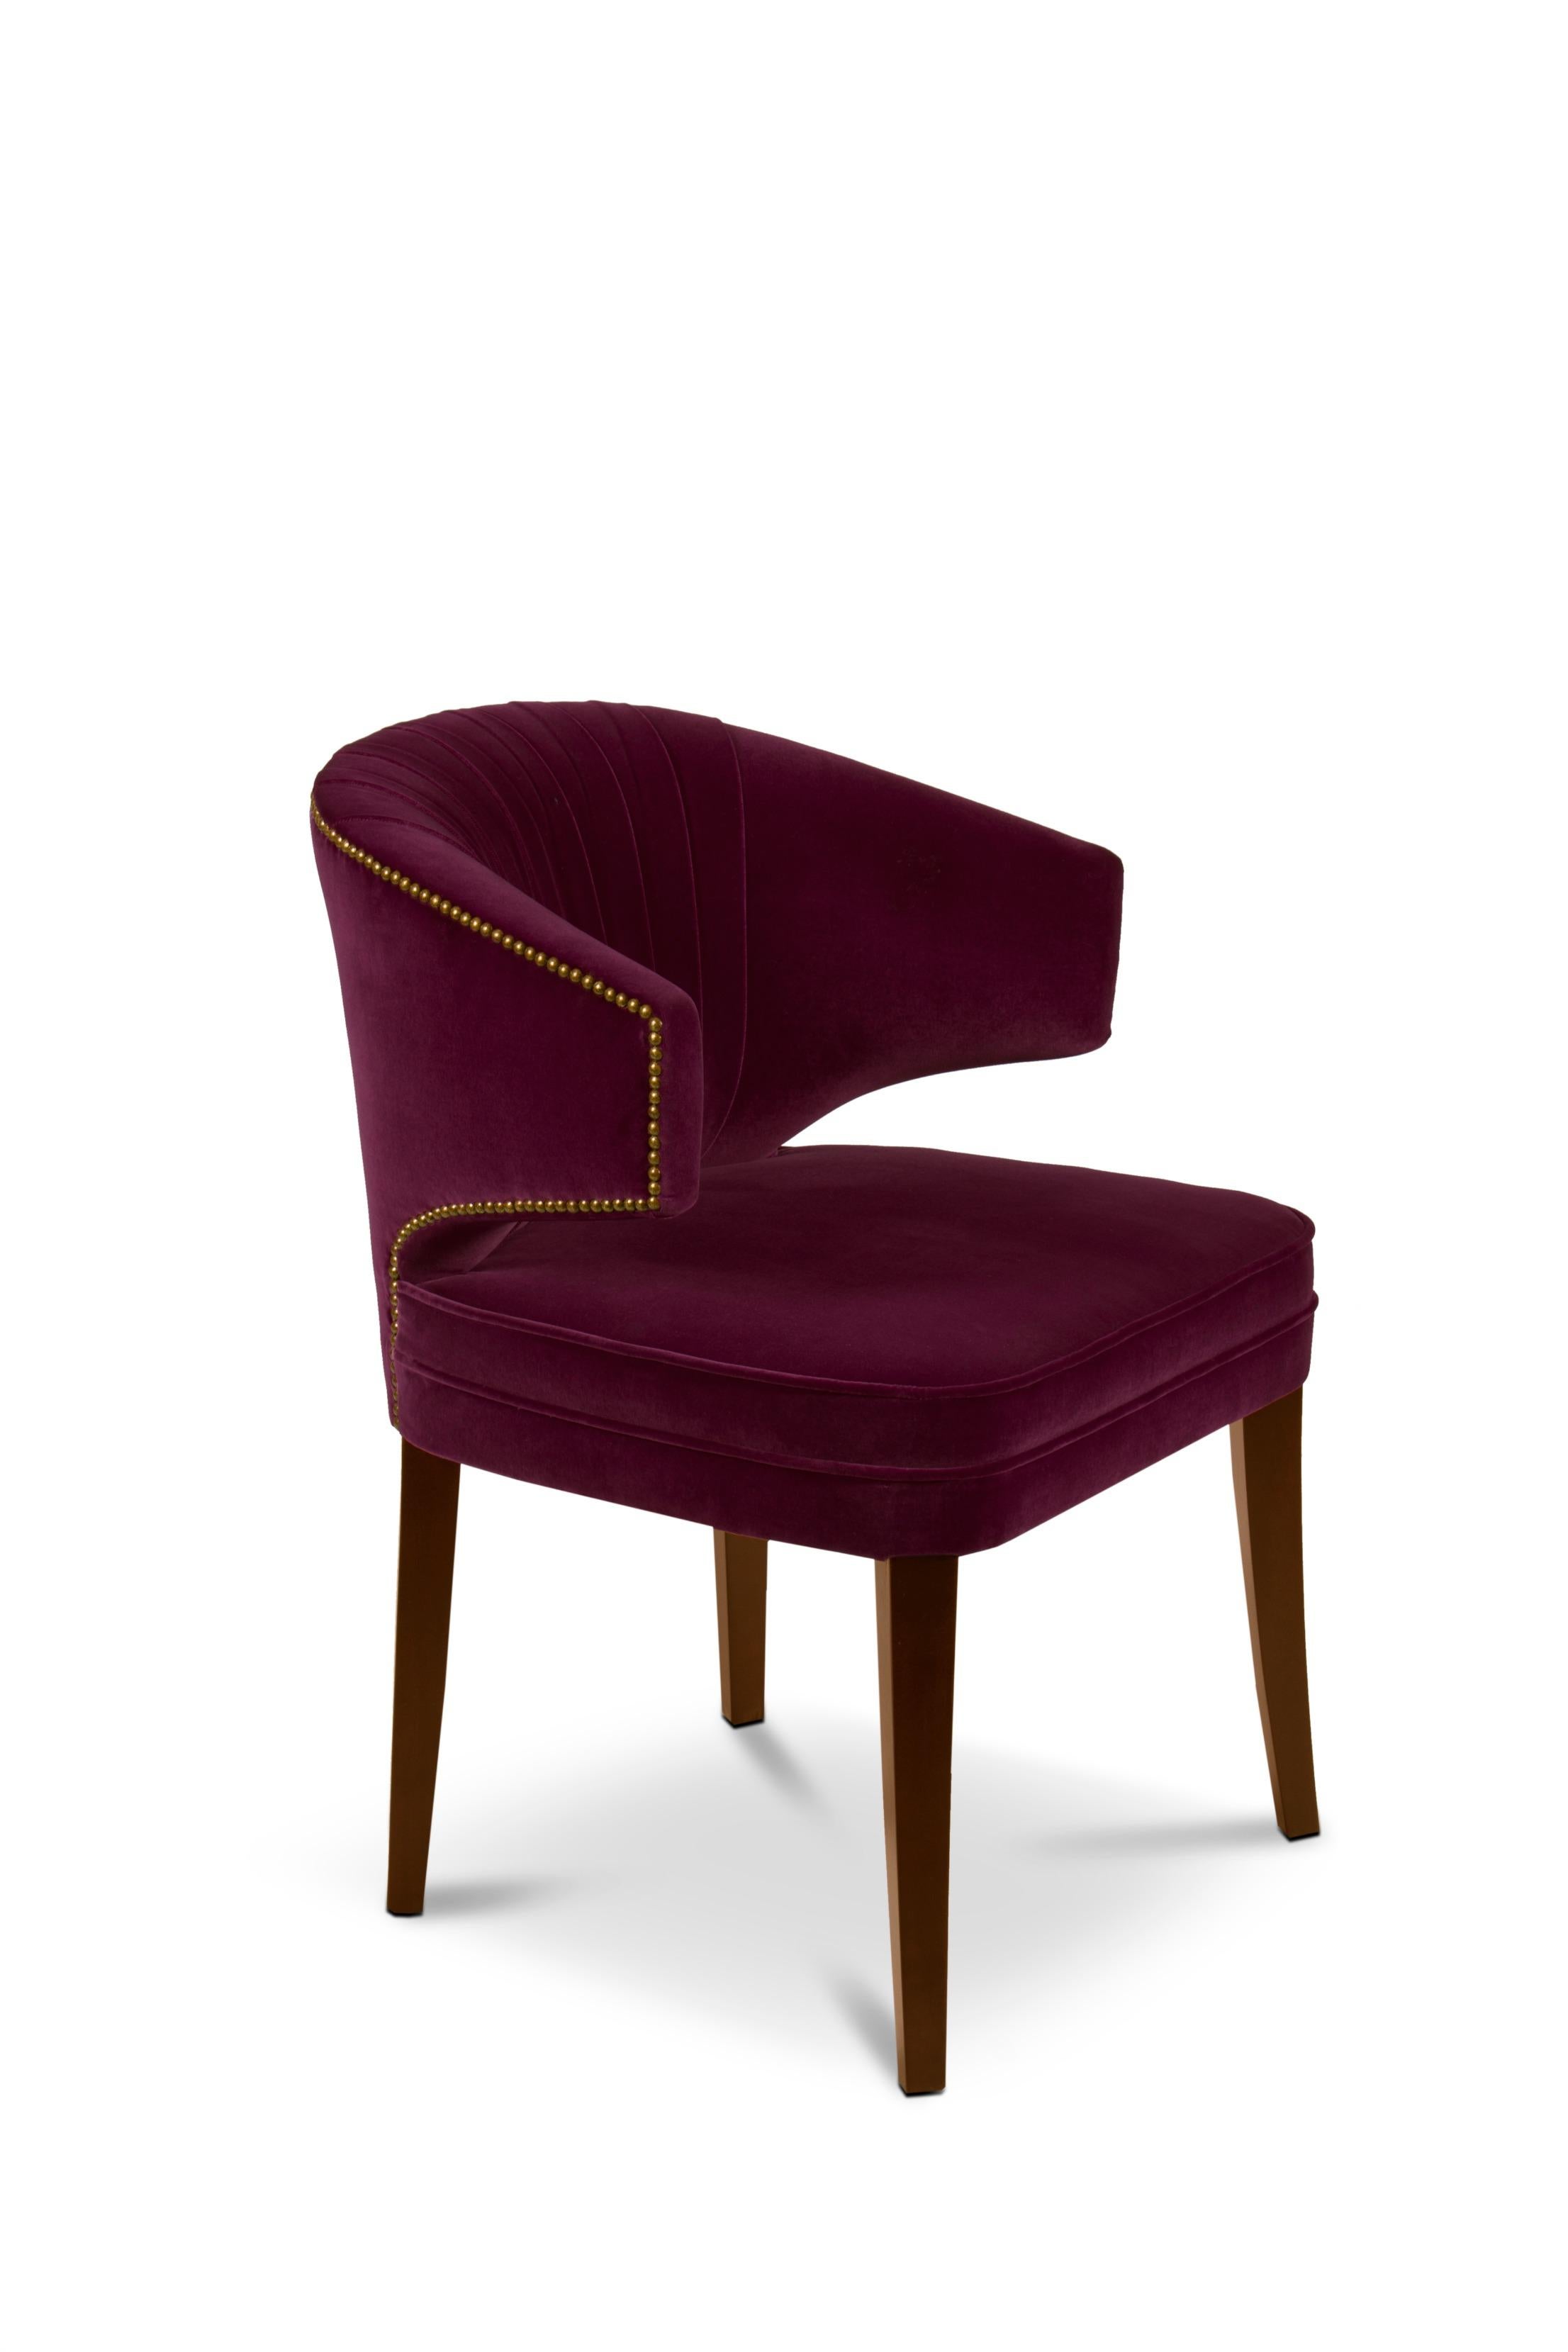 Ibis are beautiful birds known for their long slim legs. Just like IBIS dining chair, an elegant seating solution. Upholstered in cotton velvet, this velvet dining chair with an aged brass nailhead trim will be the focal point of any dining room